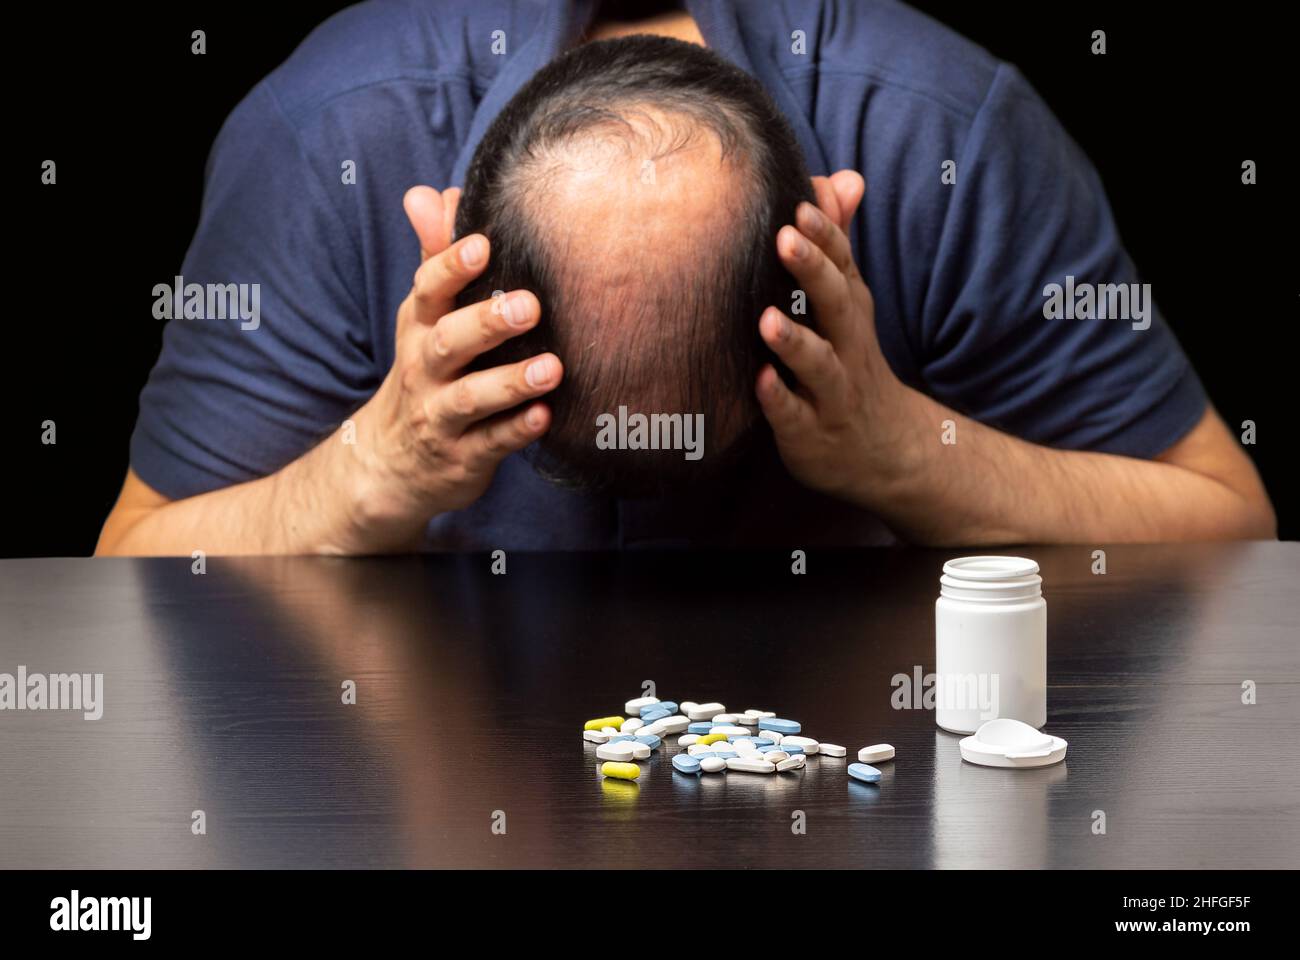 Close up of a depressed bald man next to a lot of pills on a table on a dark background Stock Photo